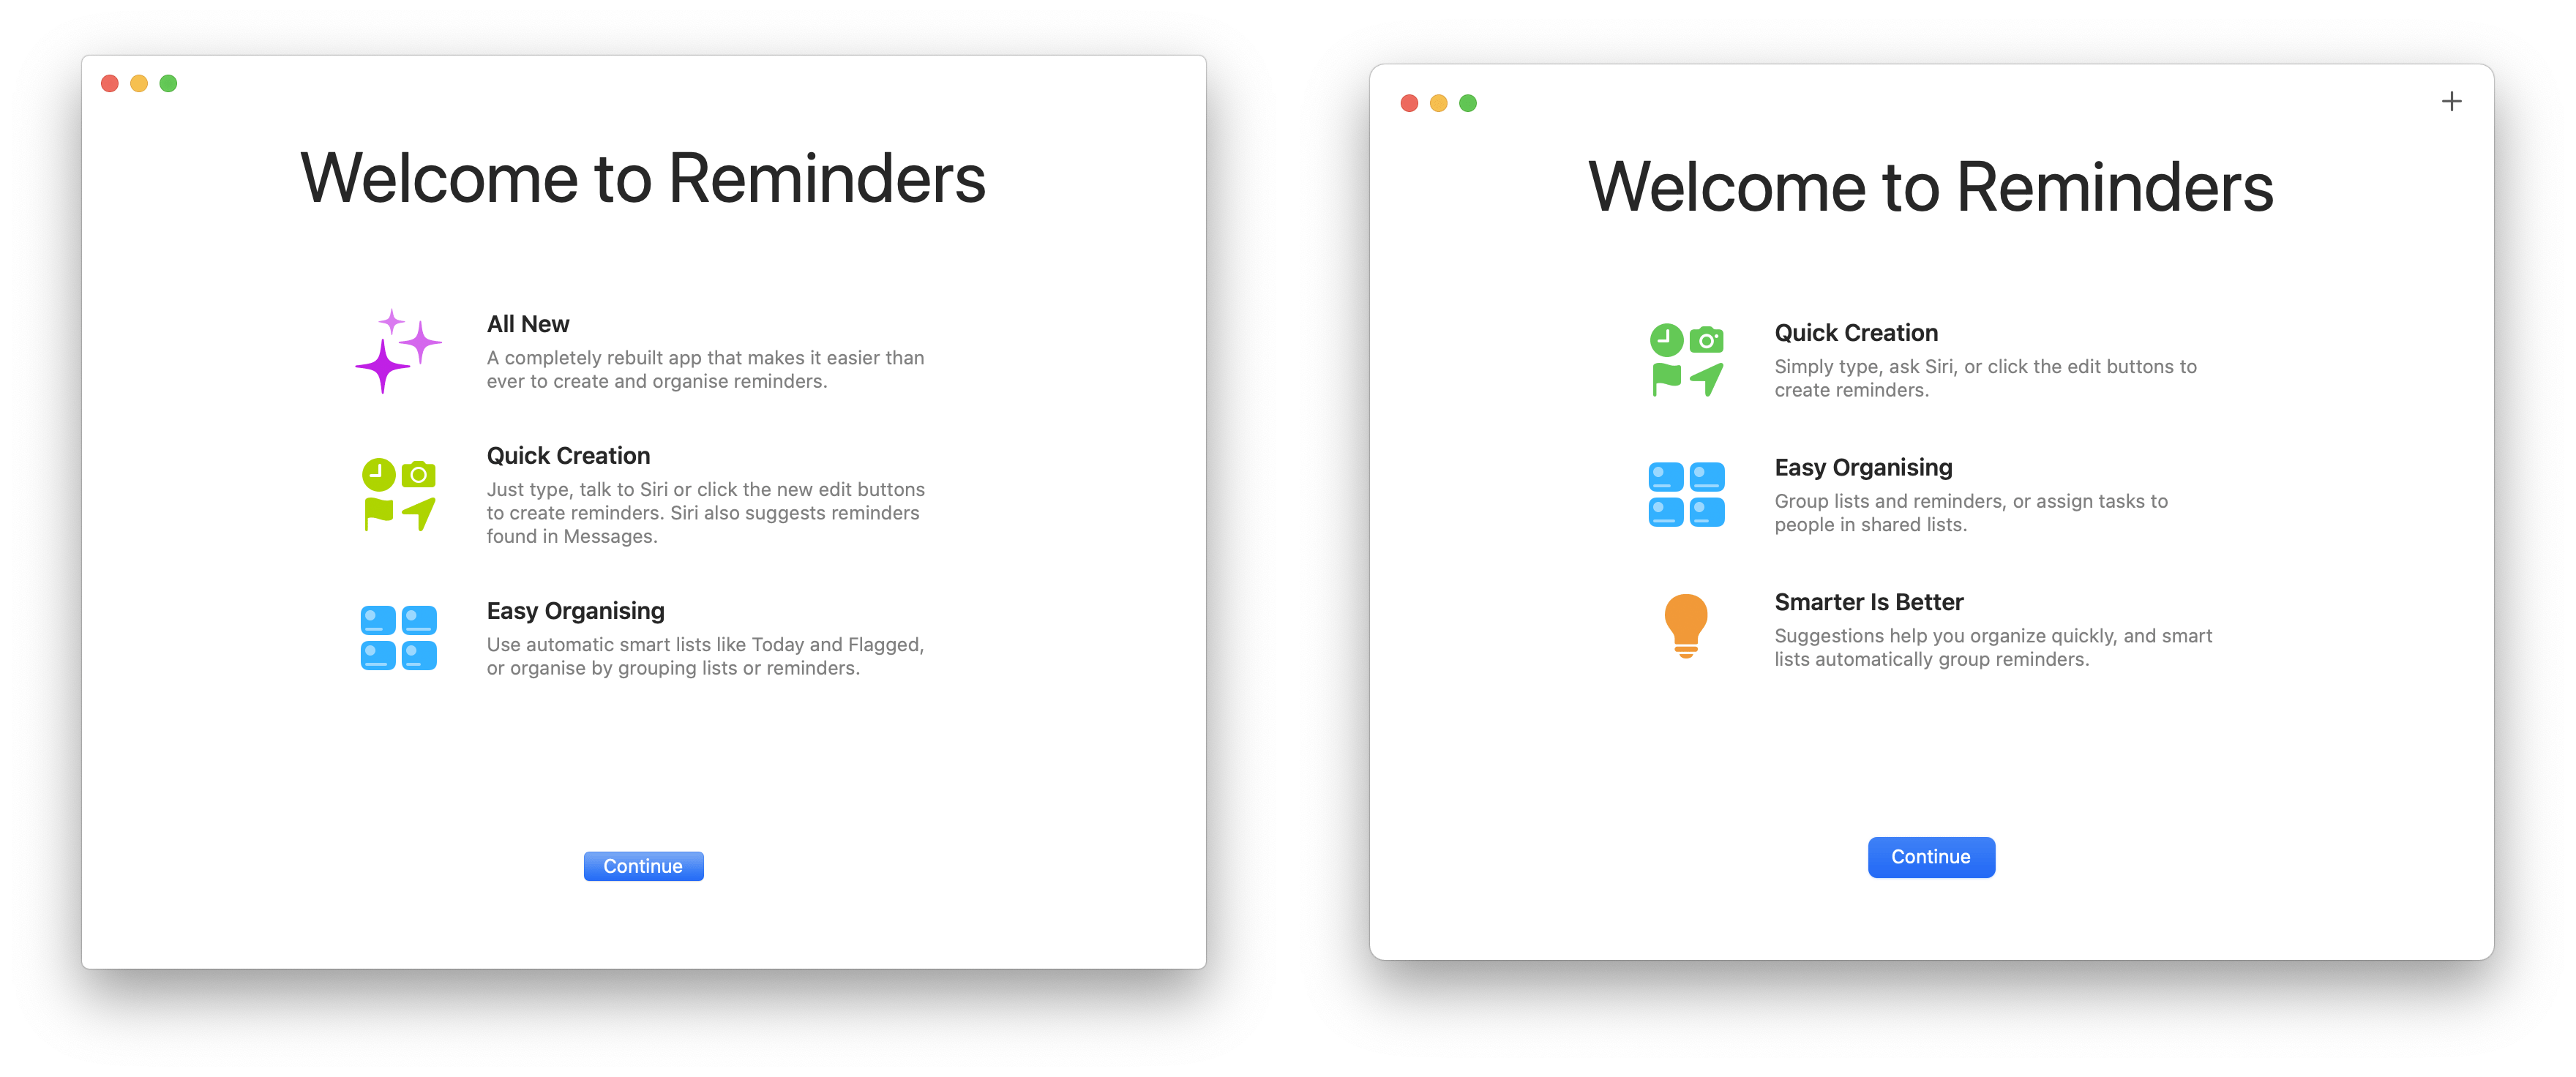 reminders-first-launch-macos-catalina-big-sur-comparison